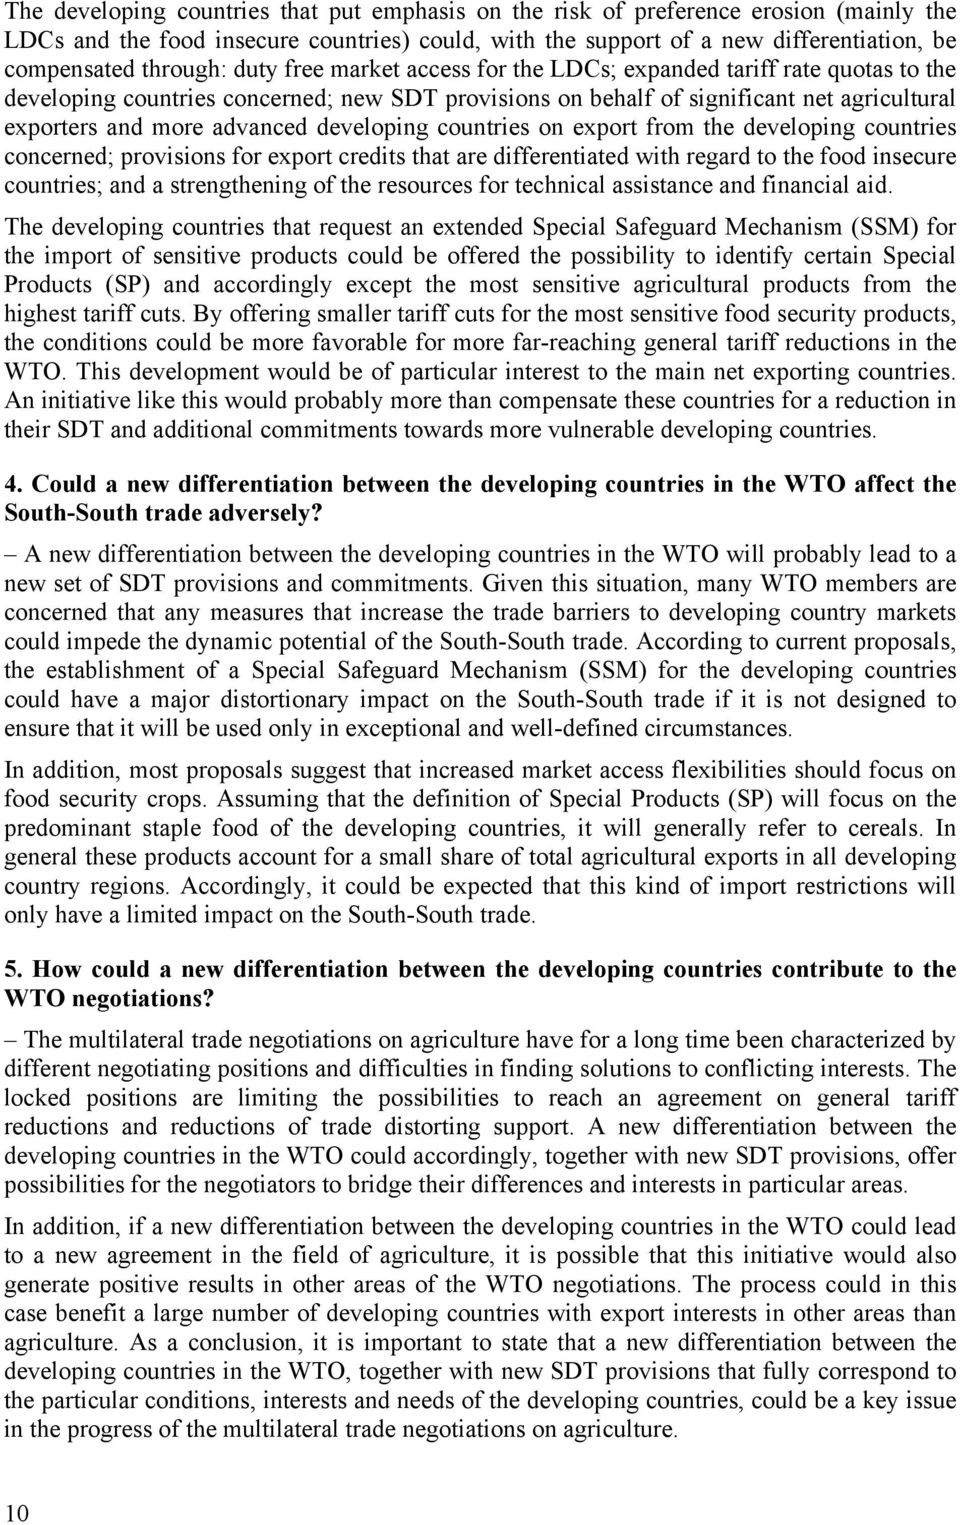 advanced developing countries on export from the developing countries concerned; provisions for export credits that are differentiated with regard to the food insecure countries; and a strengthening